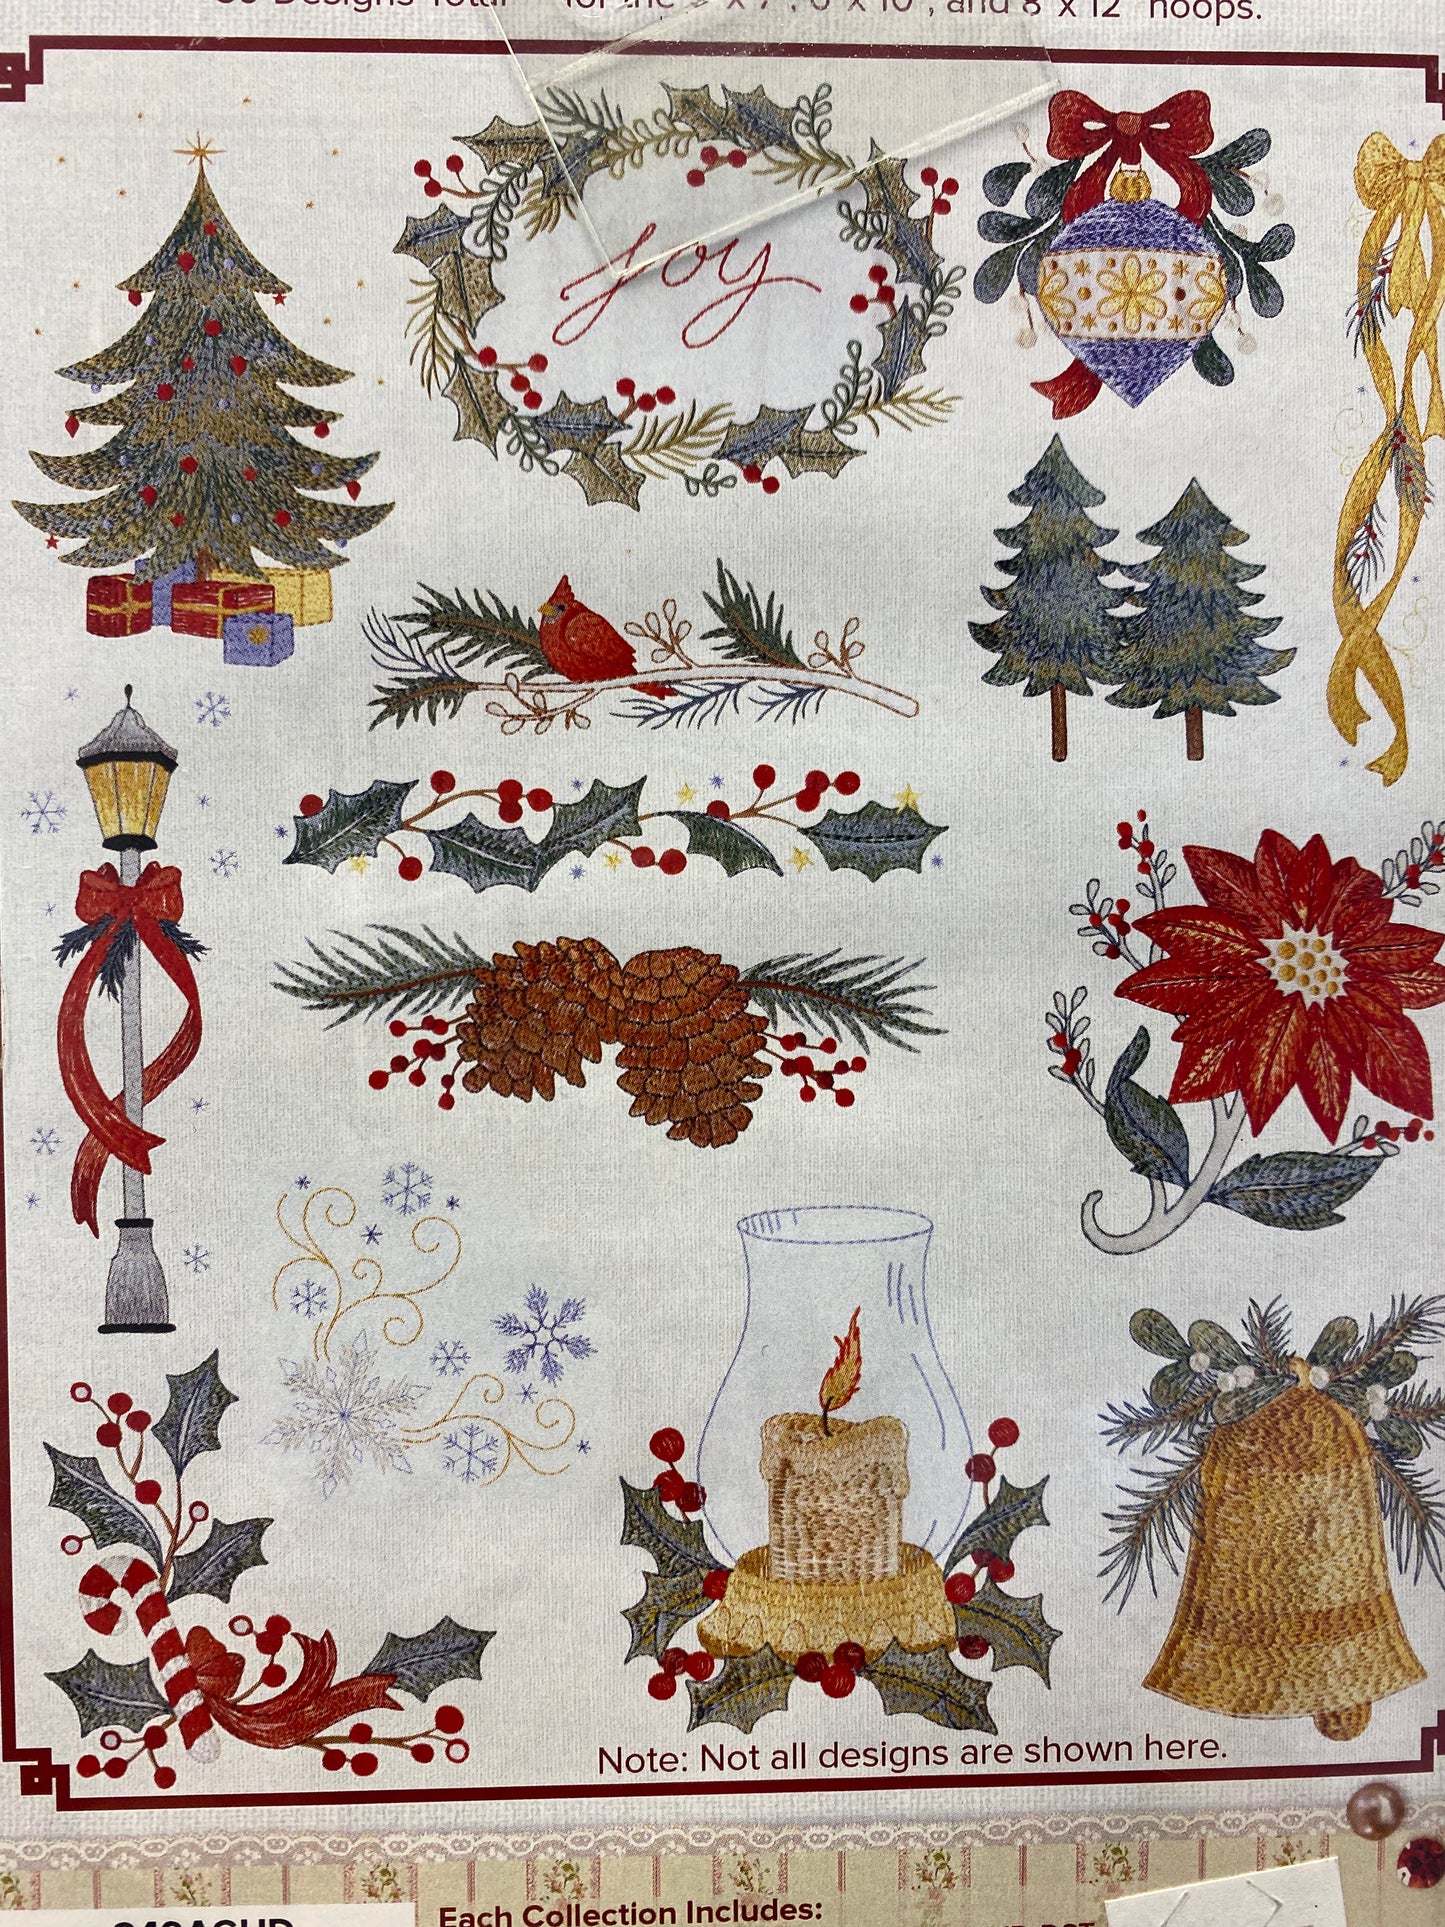 Hand Stitched Christmas by Anita Goodesign